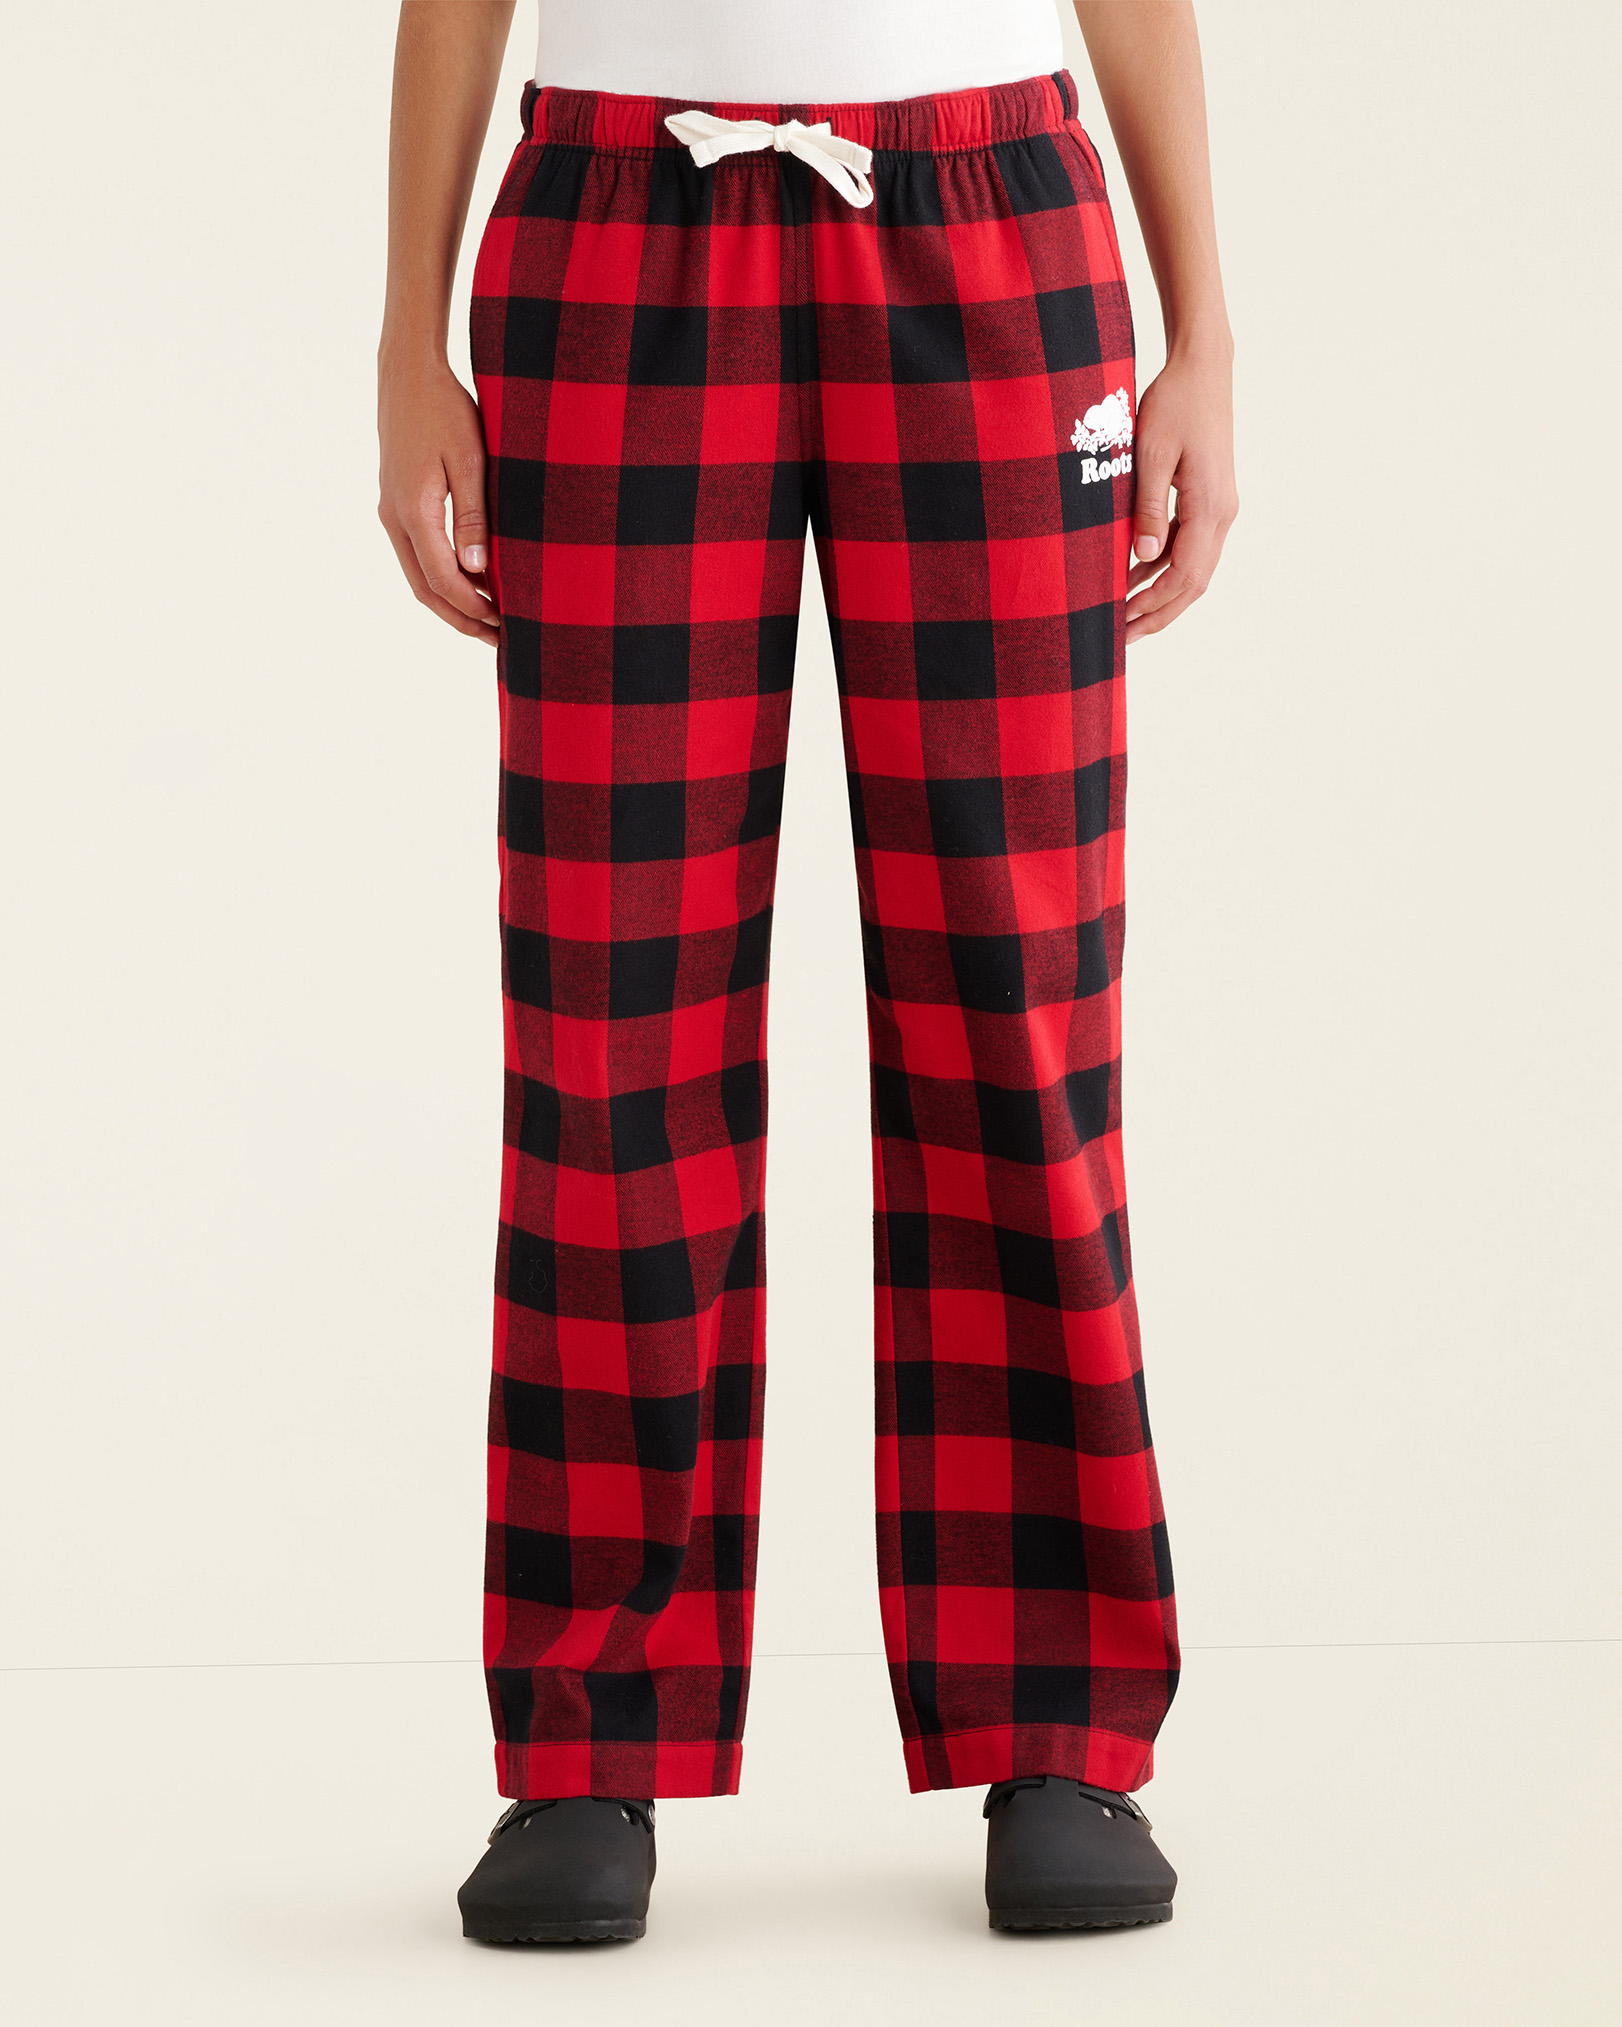 Roots Women's Park Plaid Pajama Pant in Cabin Red